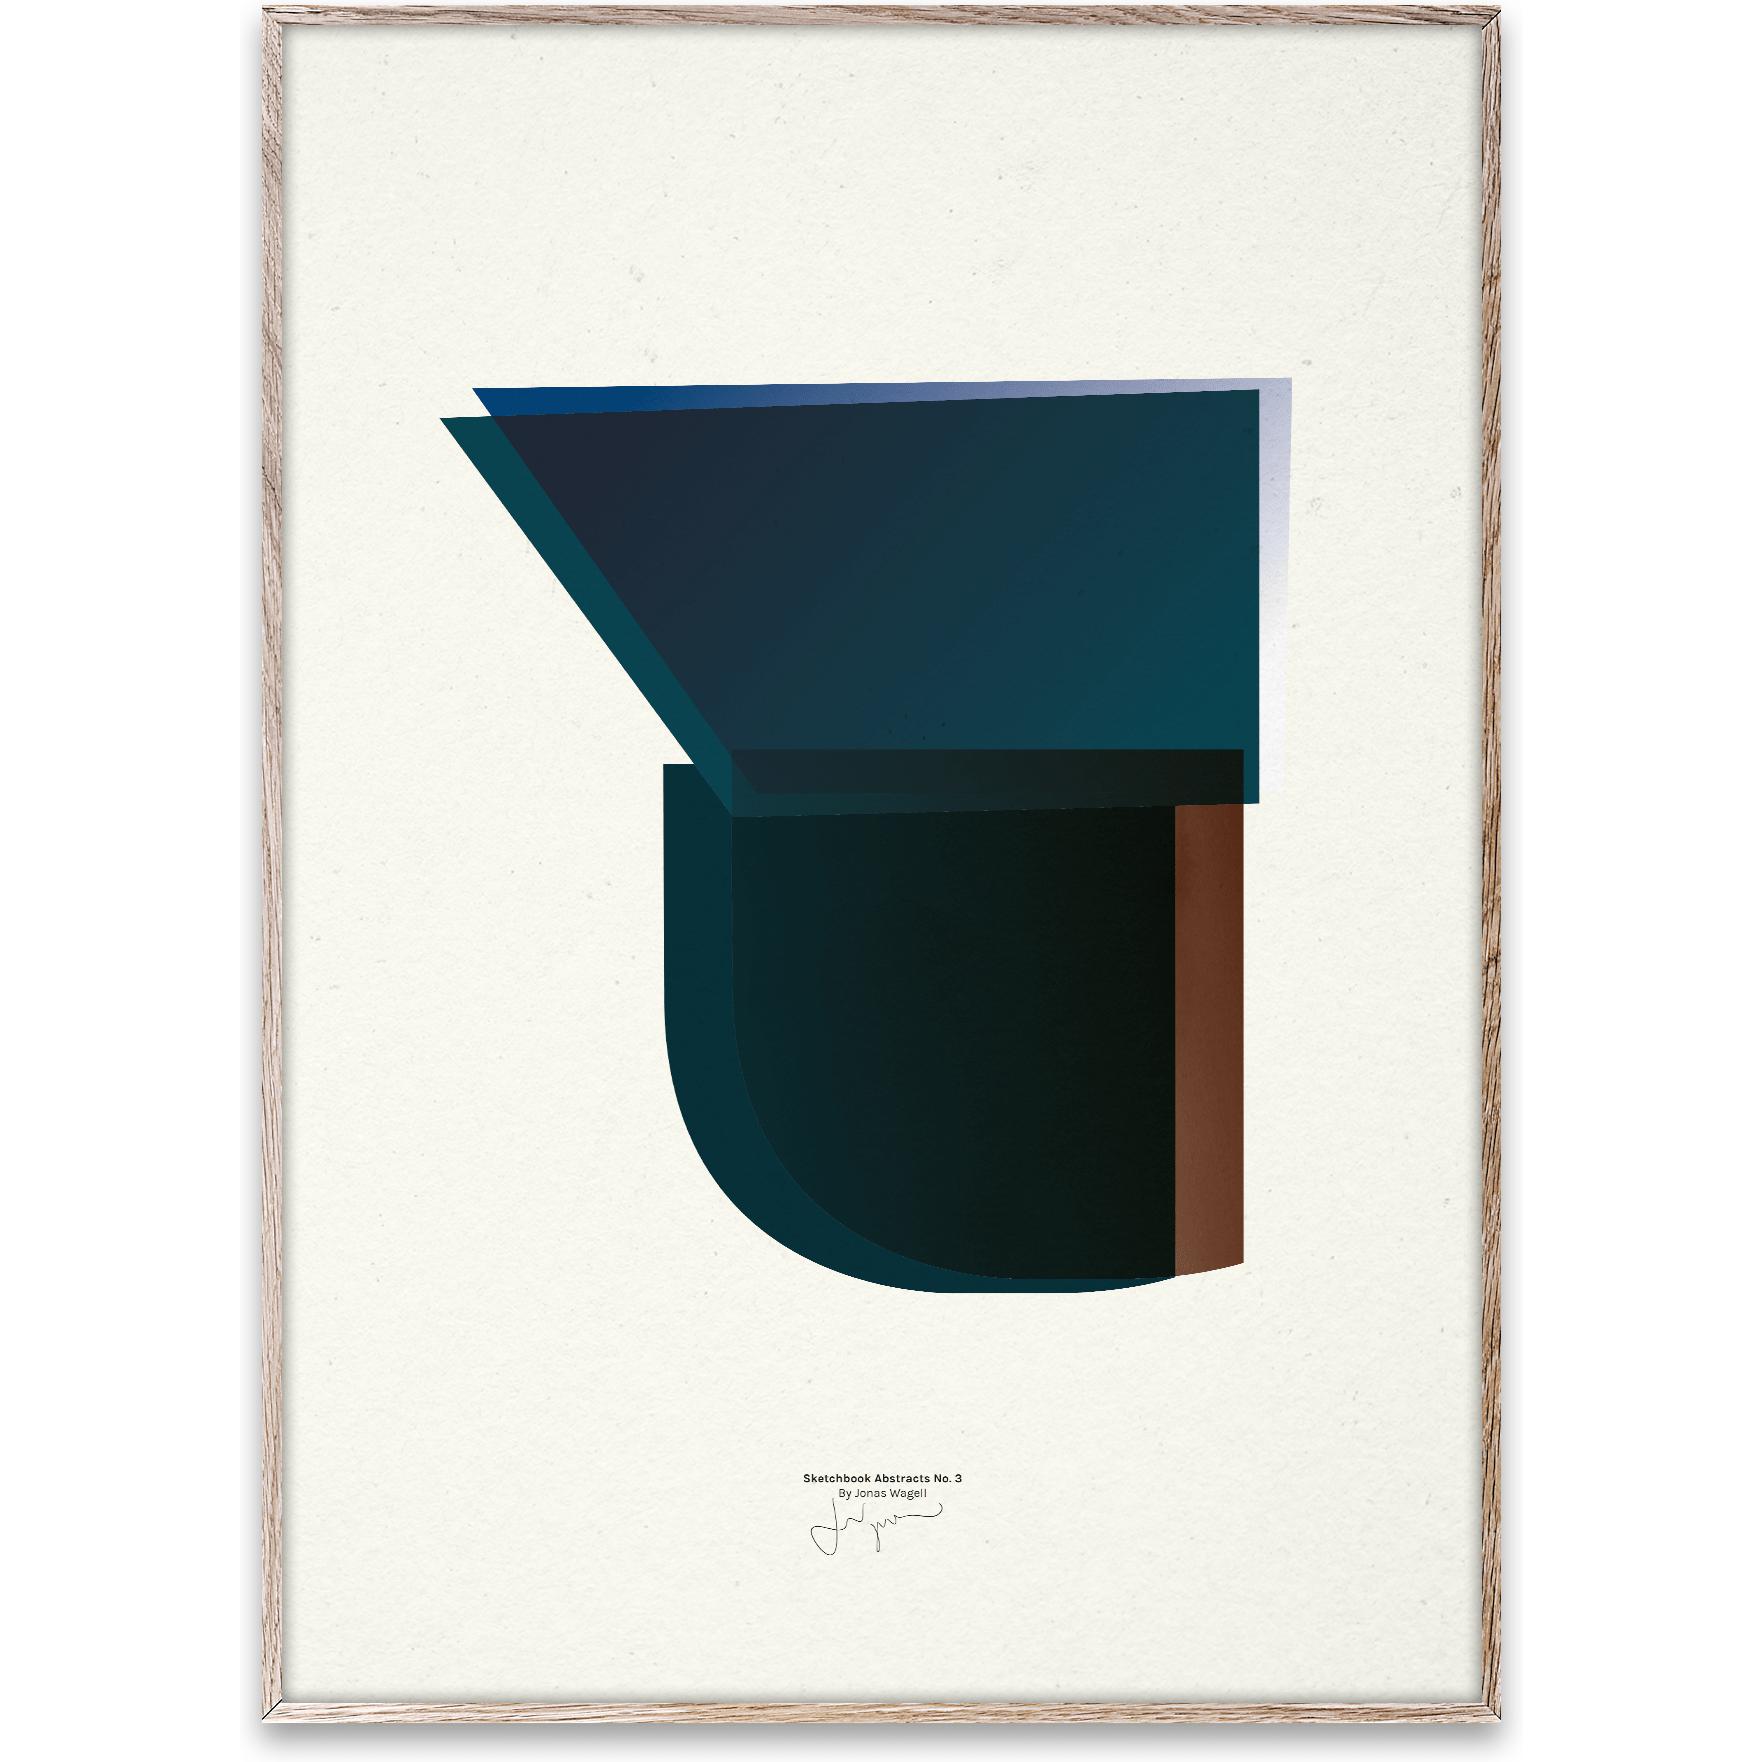 Paper Collective Sketchbook Abstract 03 Poster, 50x70 cm